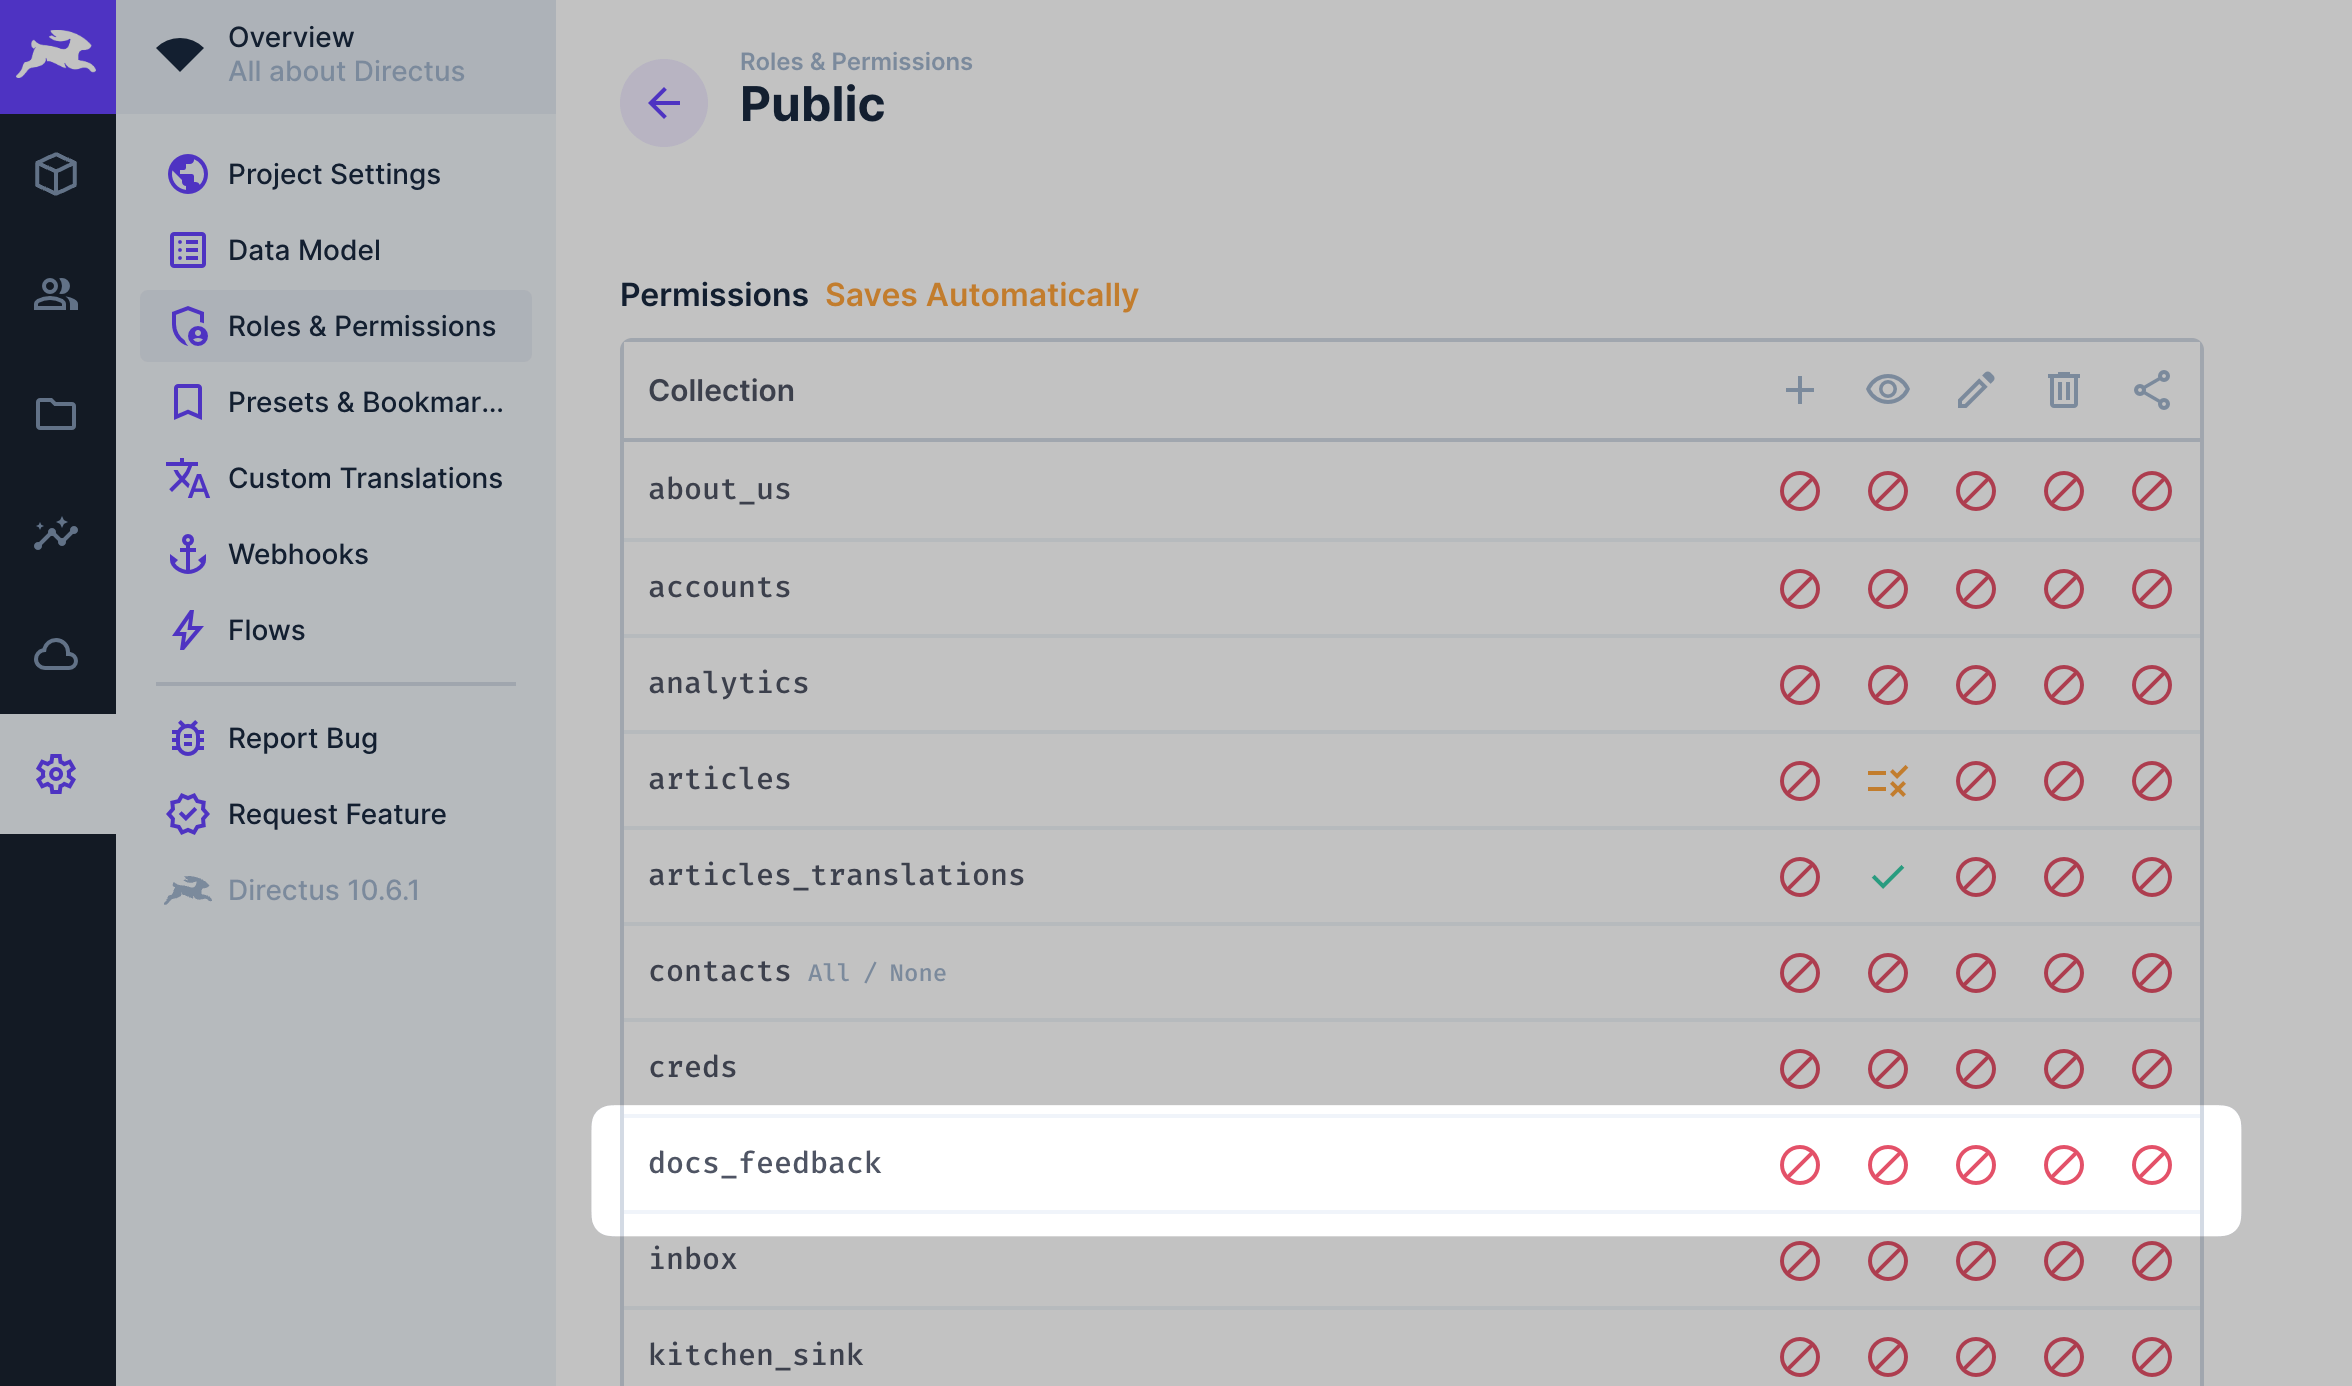 Directus Roles and Permissions settings page, the docs_feedback collection is highlighted and all CRUD permission settings are set to not allowed